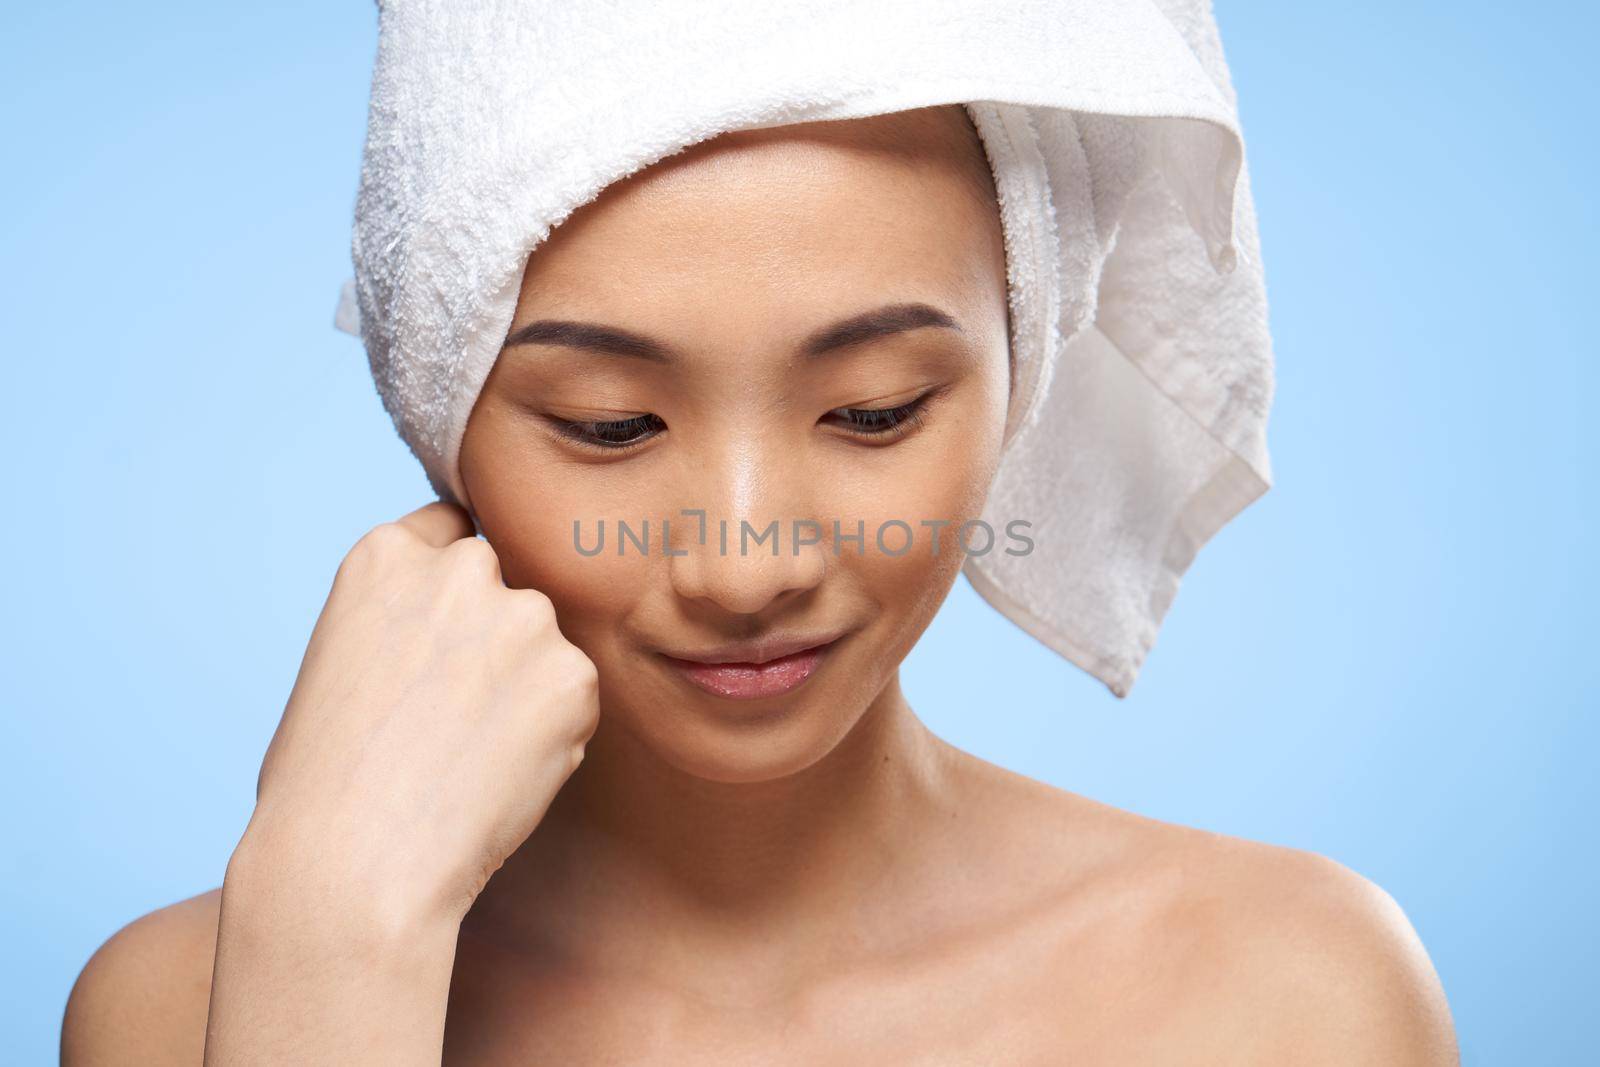 asian woman naked shoulders towel on head spa treatments close-up. High quality photo